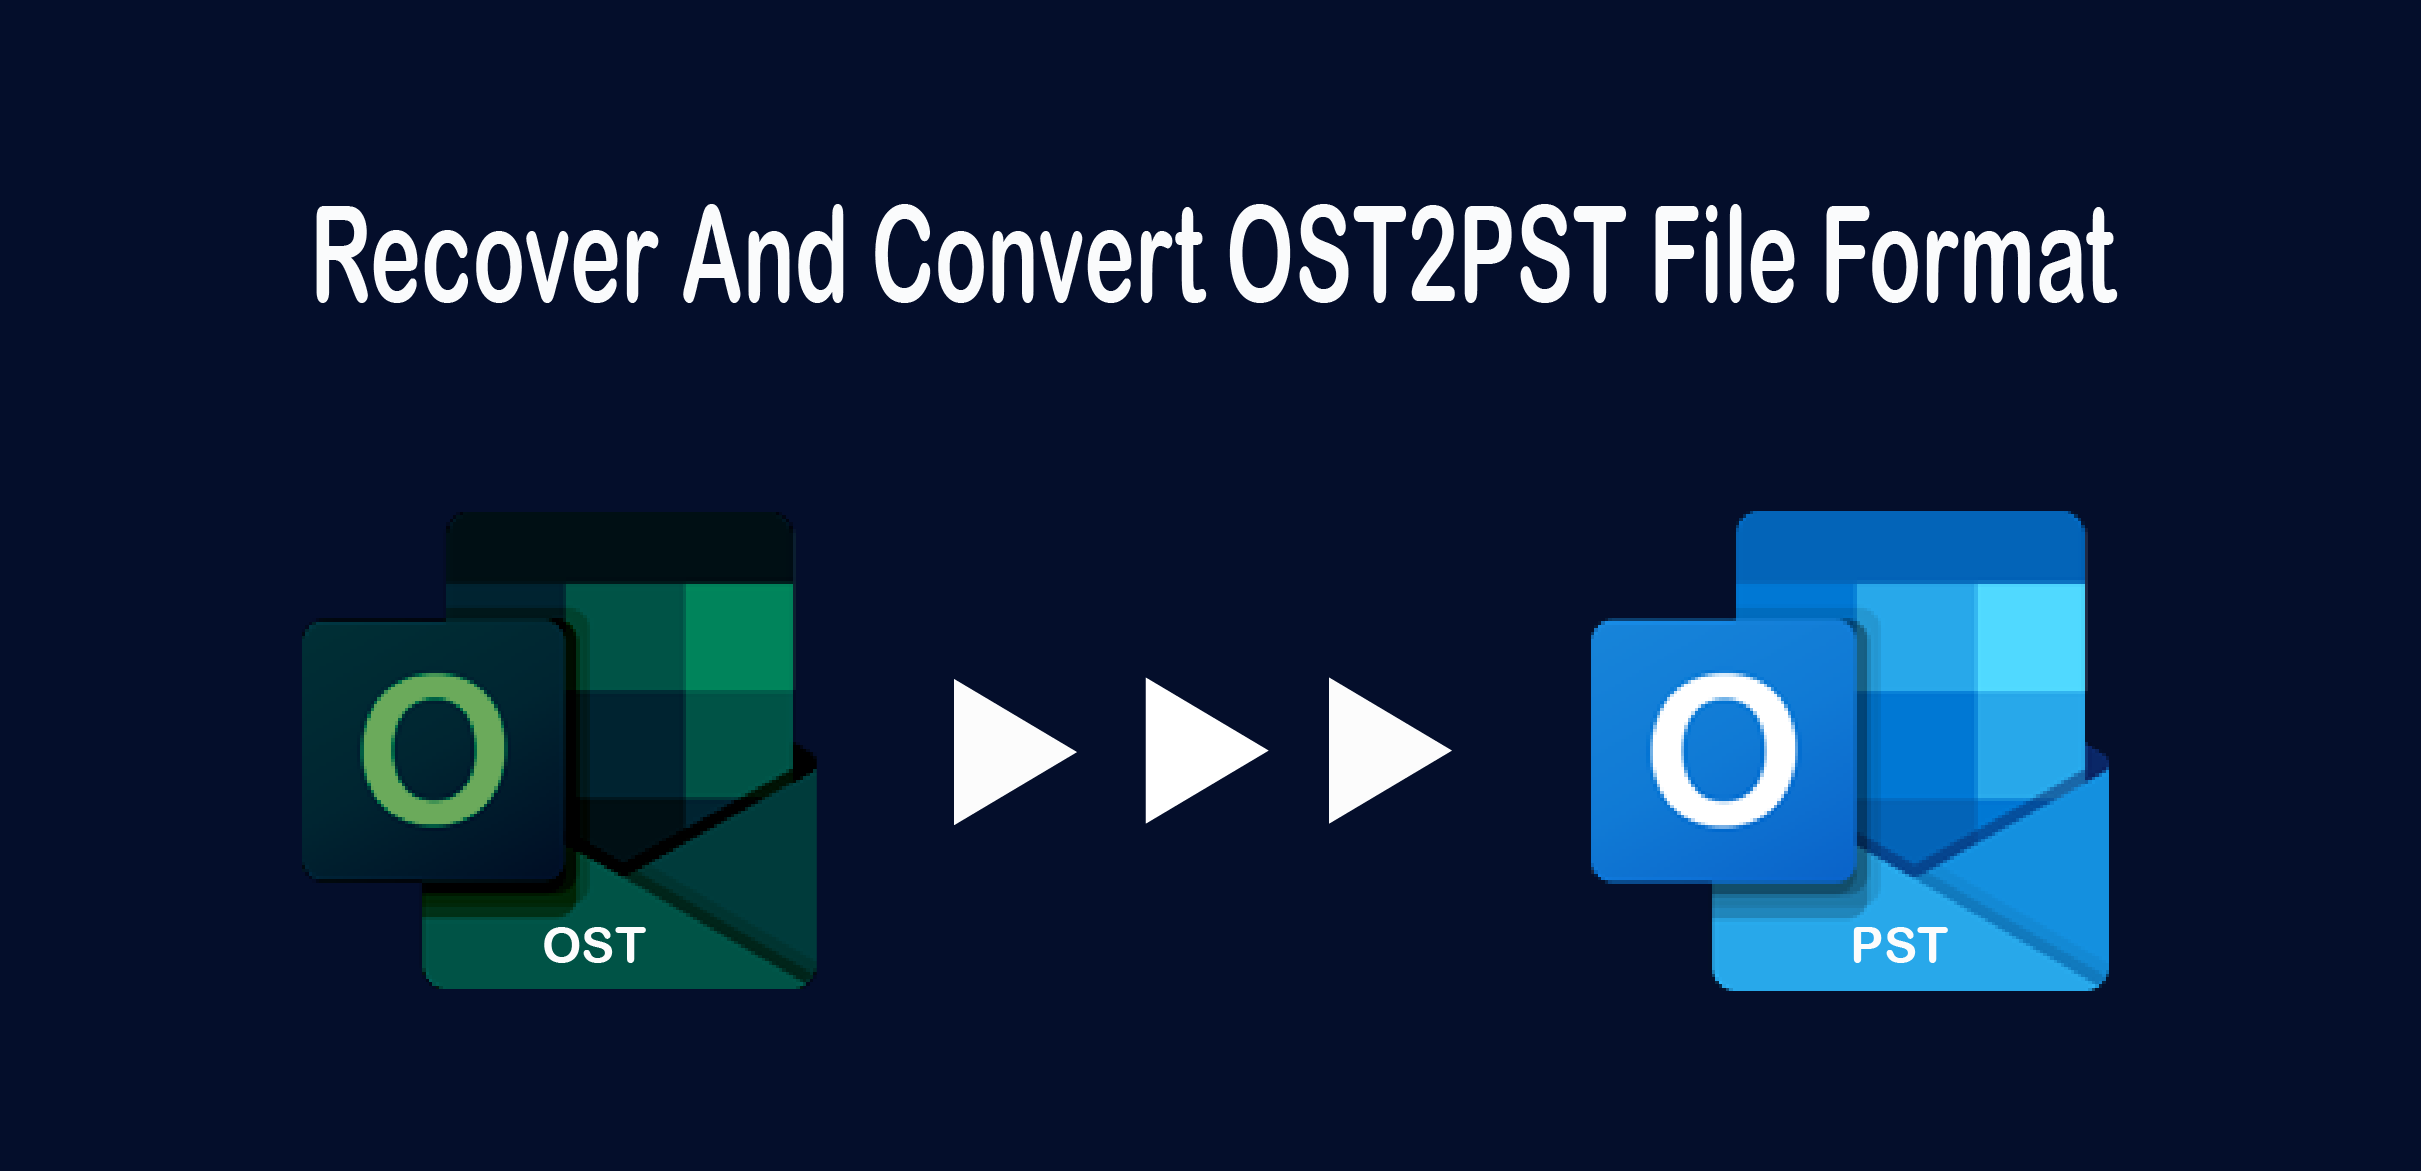 Recover And Convert OST2PST File Format

EY
_—

OST